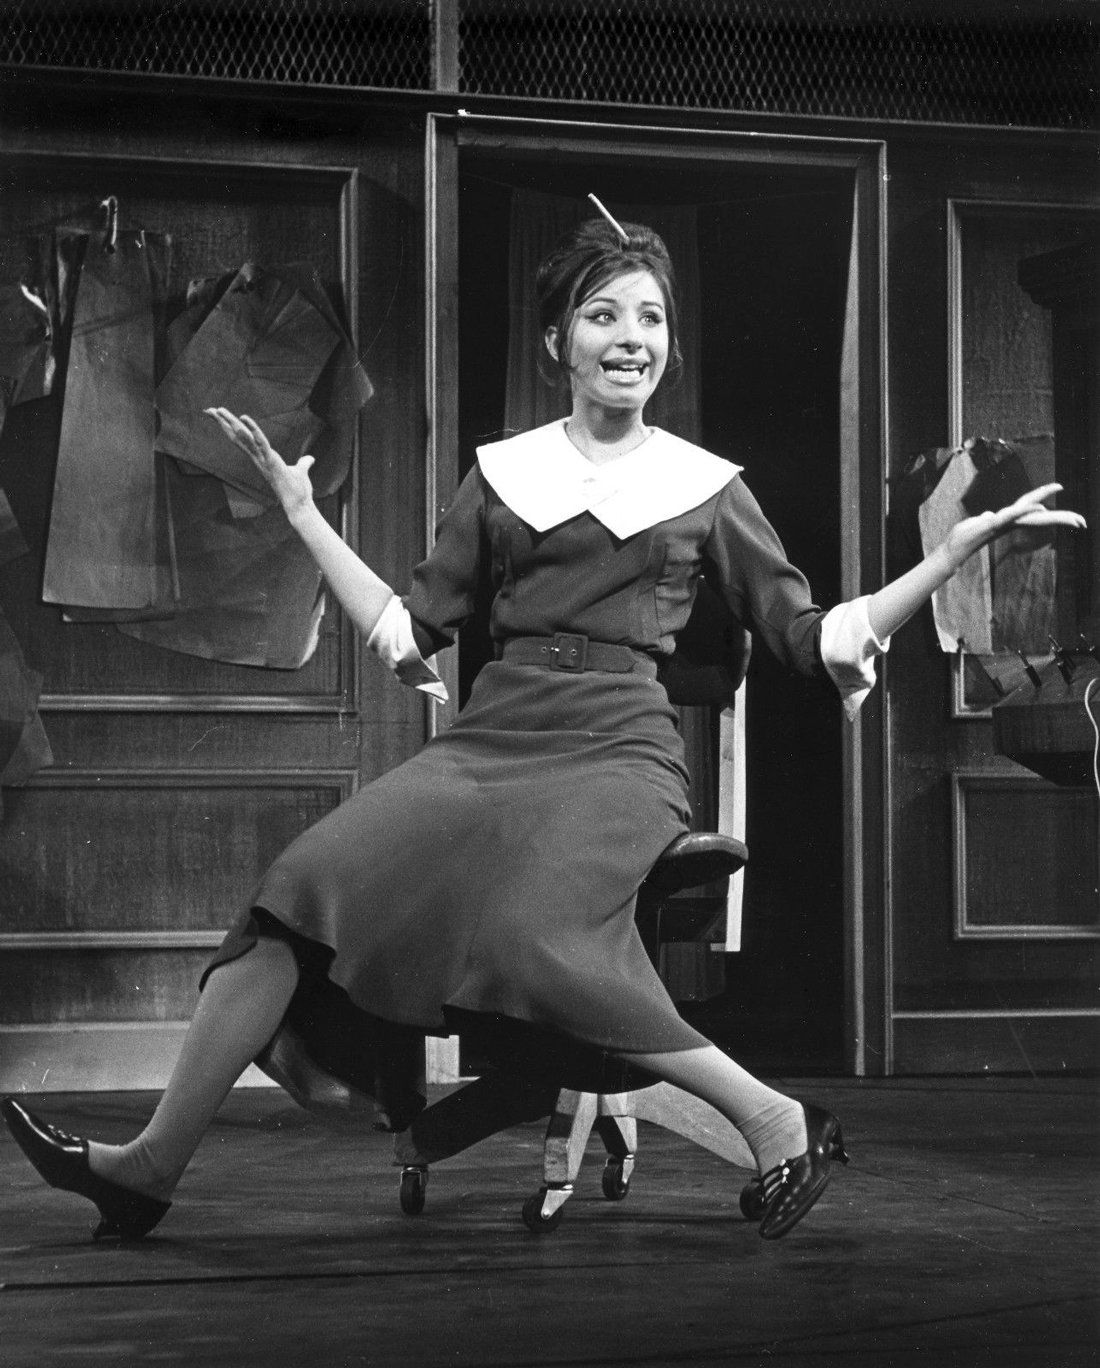 Streisand on a secretarial rolling chair